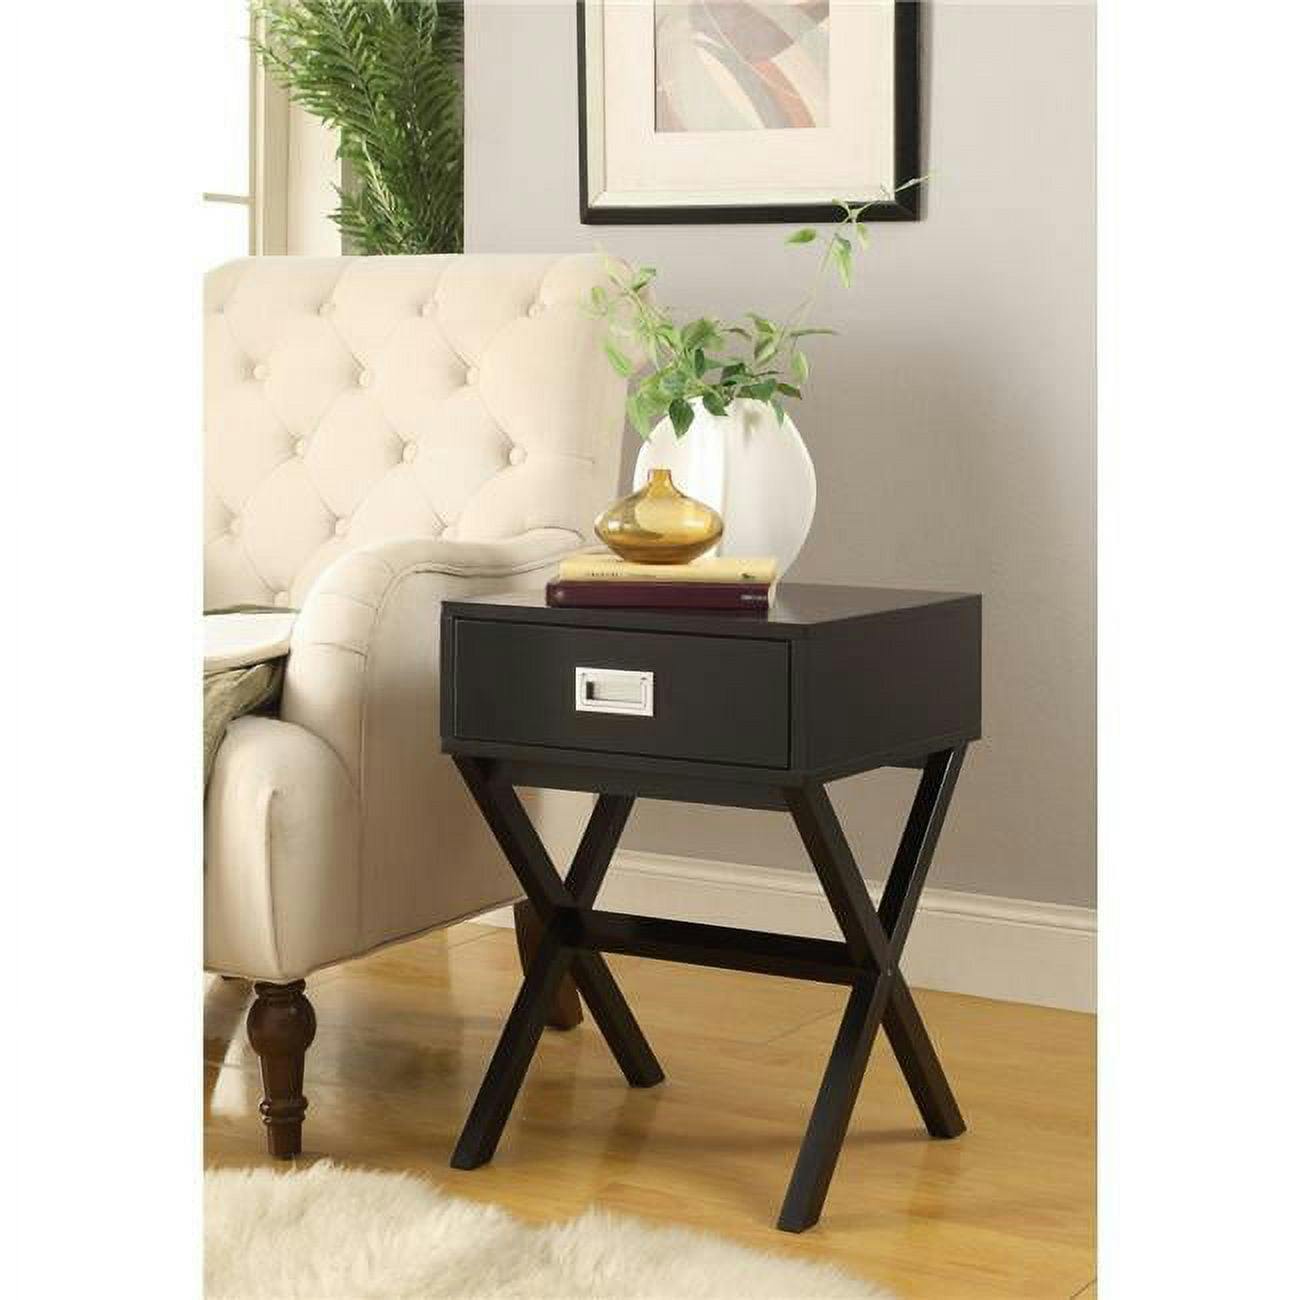 Chic Black Square Metal & Wood End Table with Storage